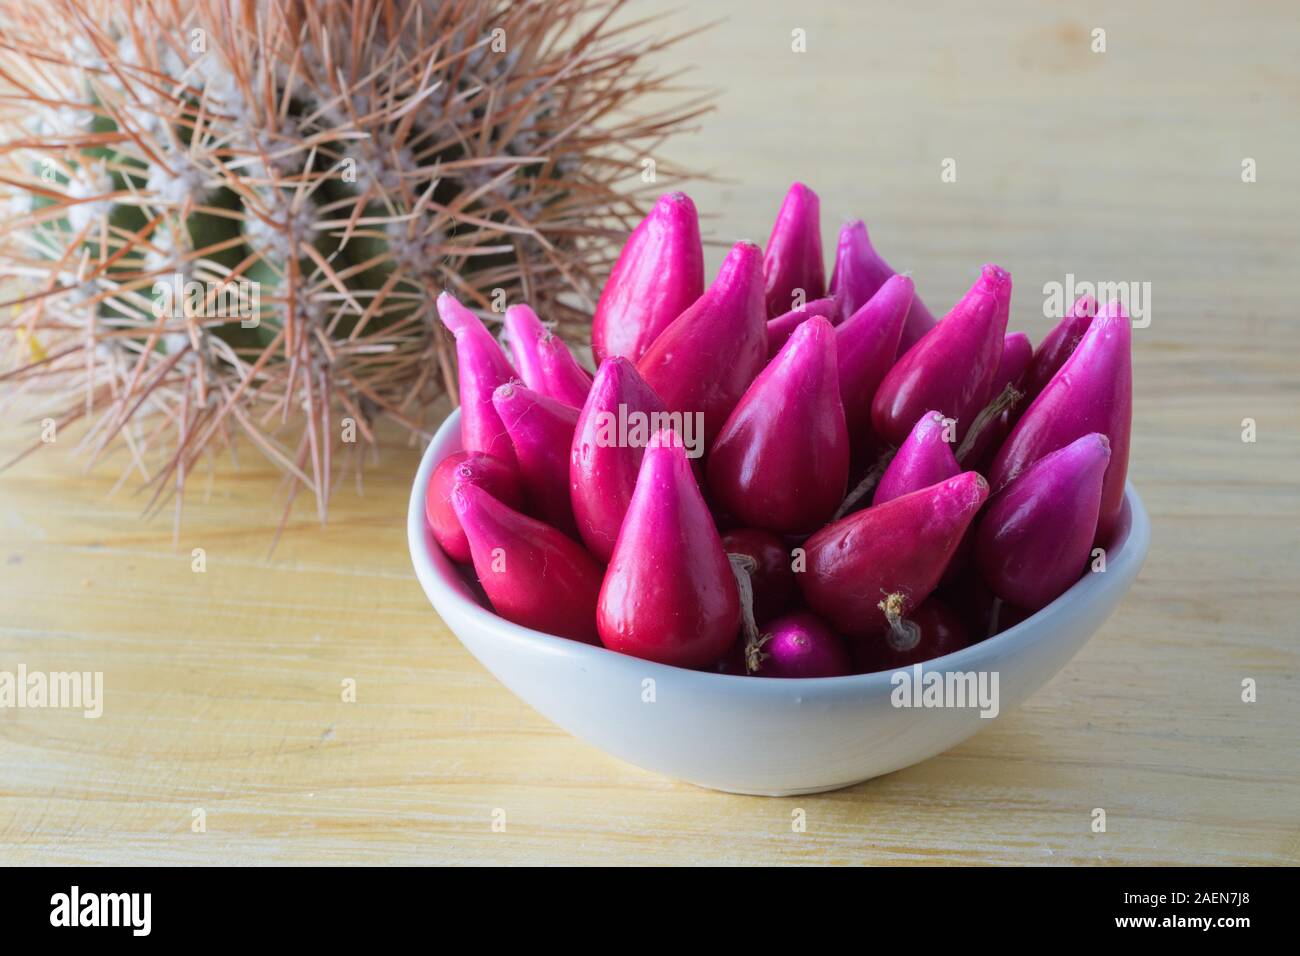 Pitiguey tropical fruit group in white bowl on wood table with Cactus. Stock Photo